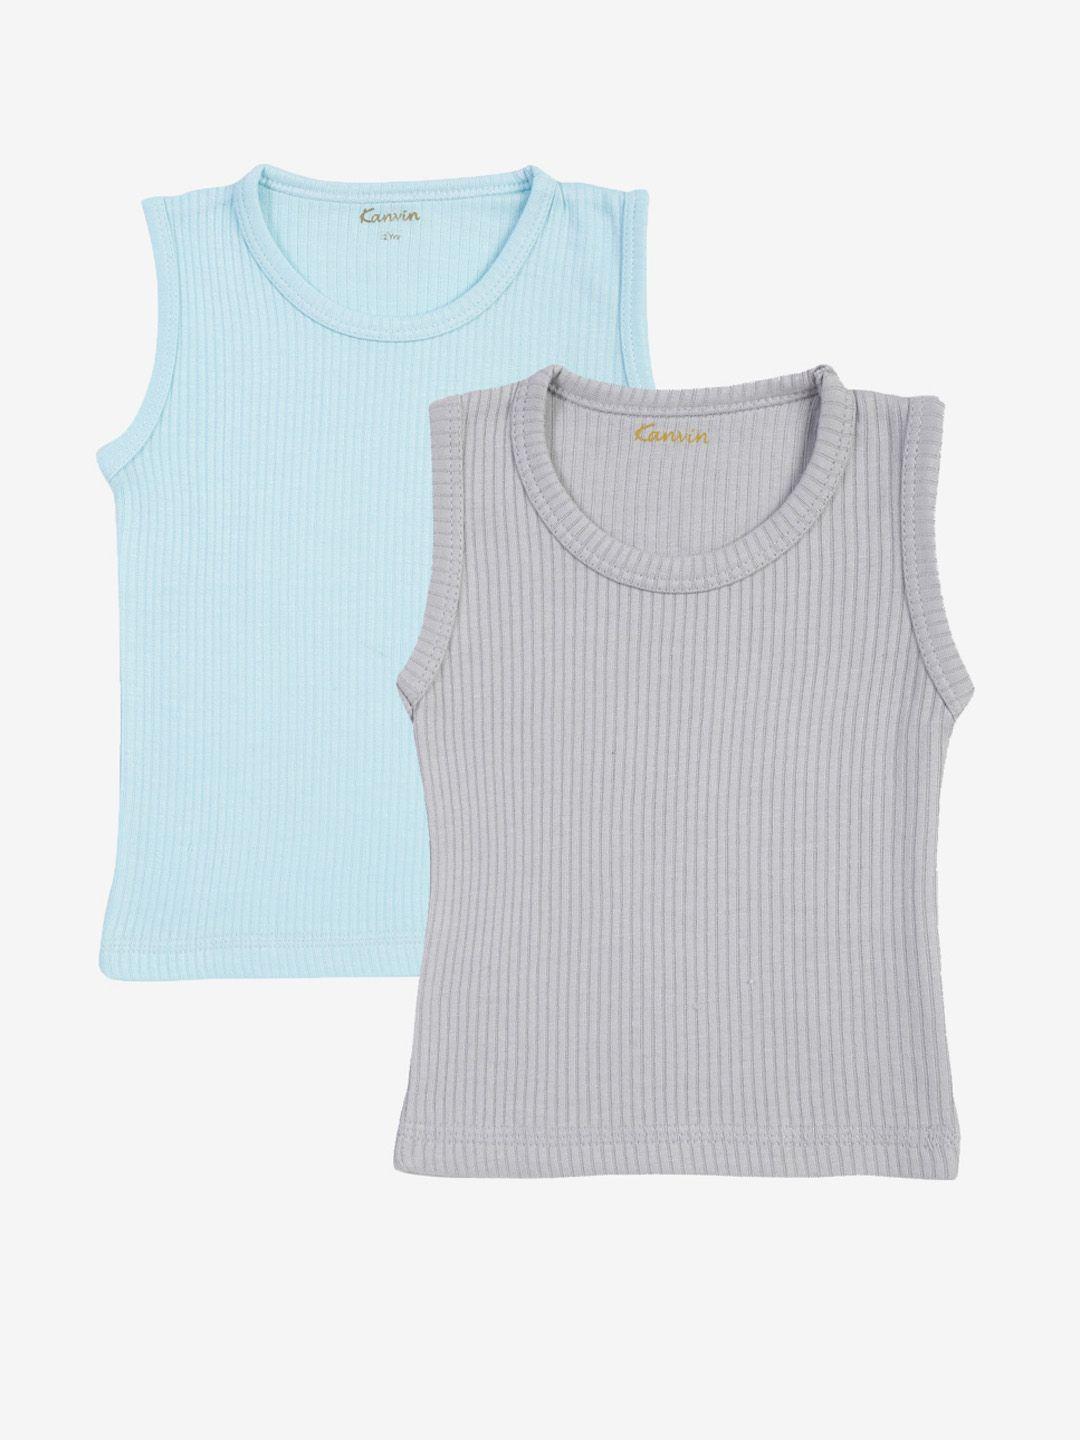 kanvin boys pack of 2 turquoise & grey ribbed cotton thermal tops